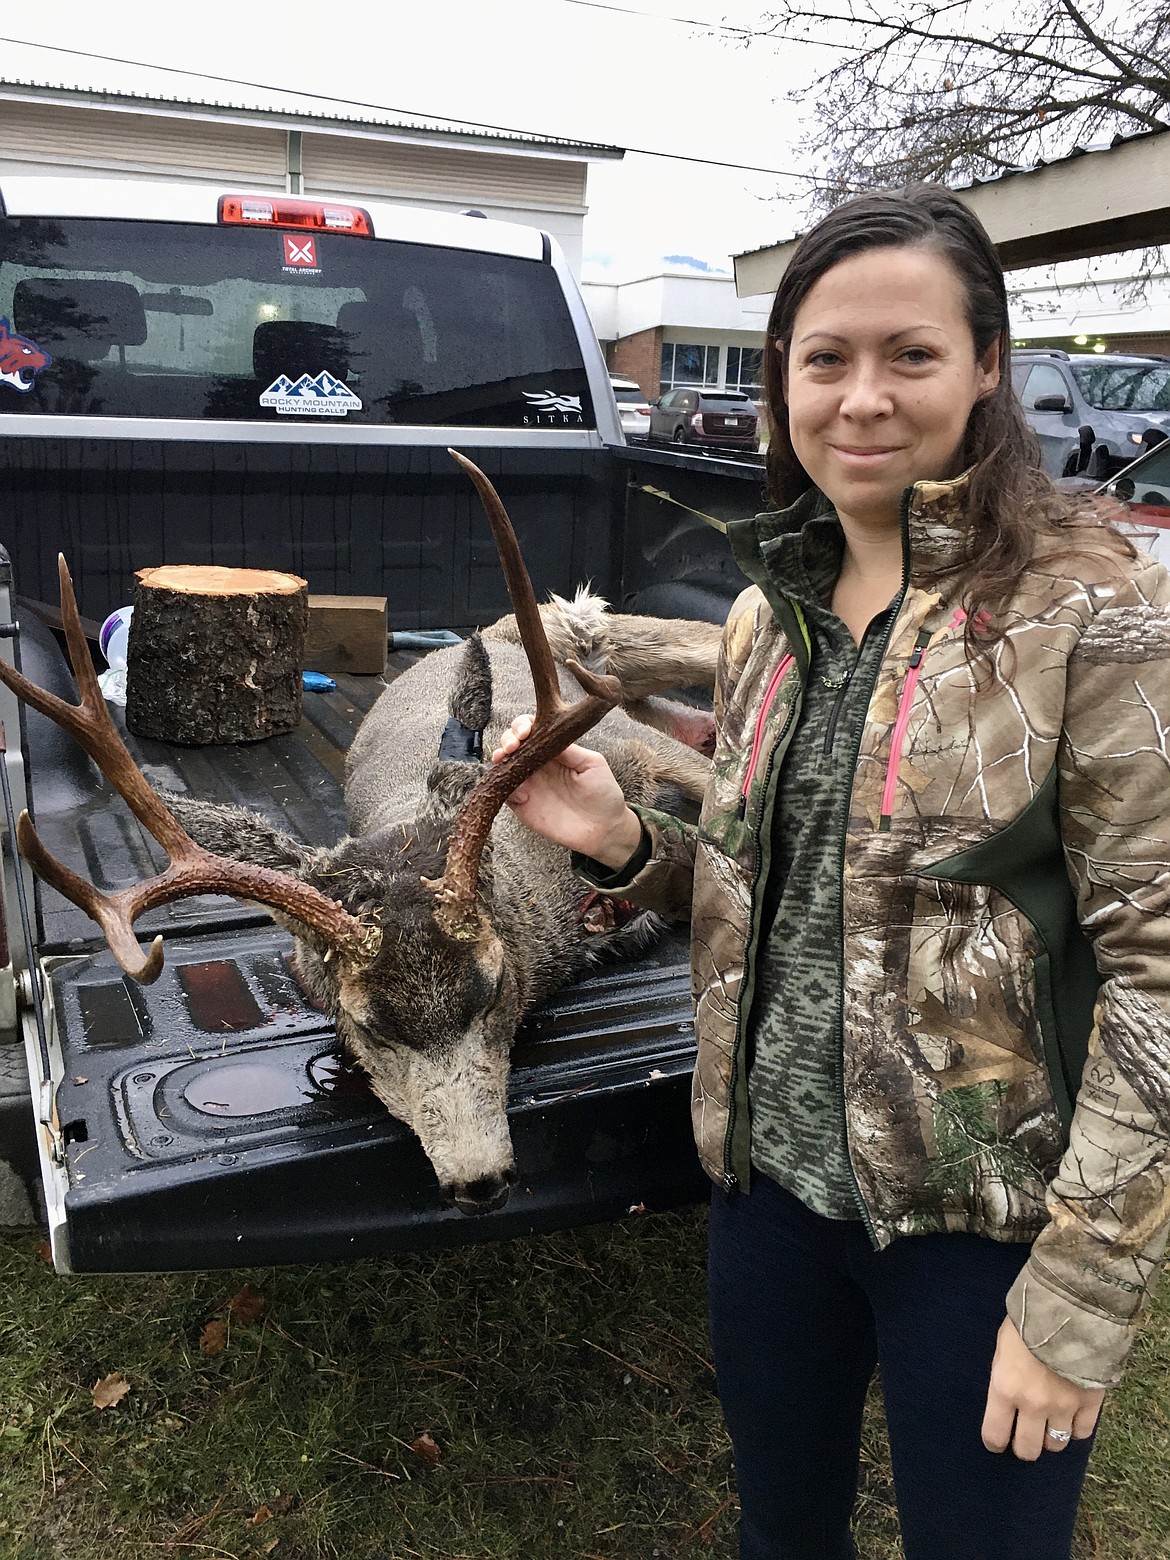 I wasn't able to get a picture of my buck in the field, because of our quick retreat with the boys. So first thing in the morning after my husband and our friend got it home, I went out and posed with my harvest. (Mineral Independent/Amy Quinlivan)